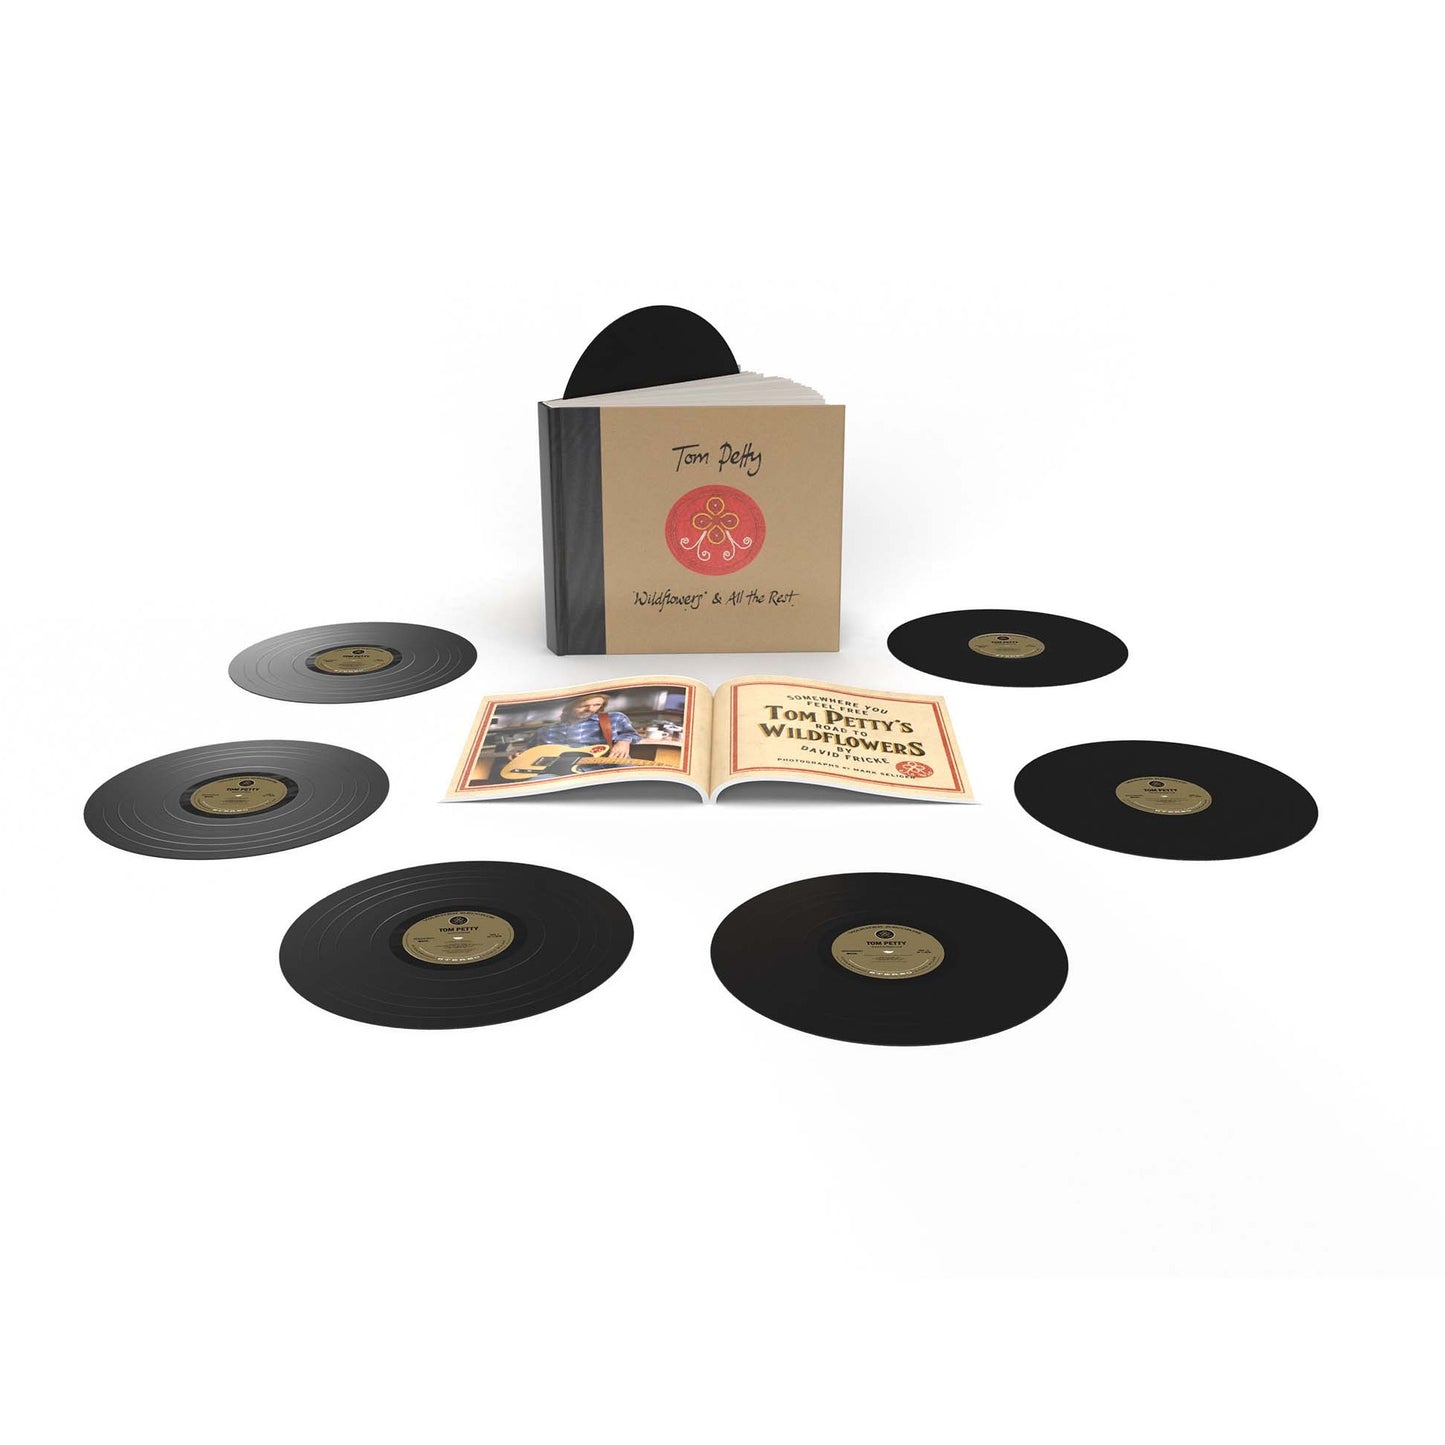 7 LP - Wildflowers & All The Rest - Deluxe Edition